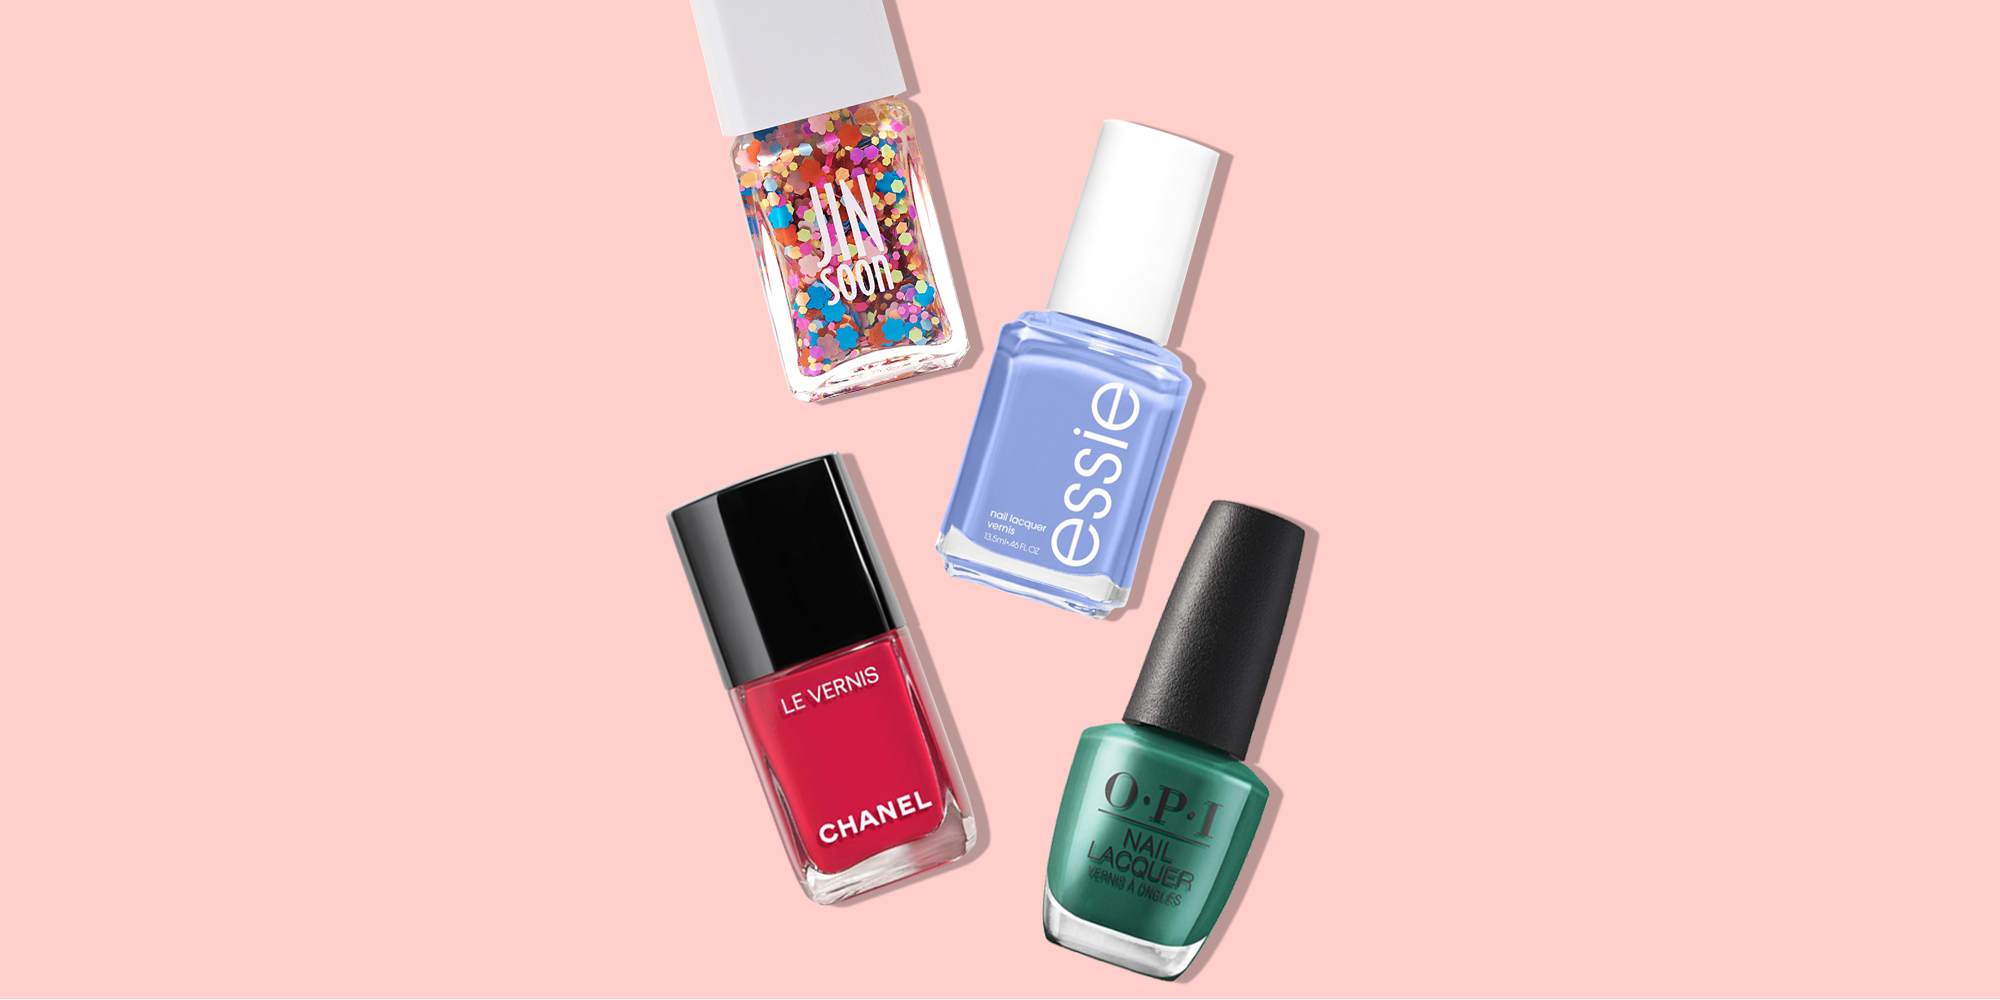 Chanel Launches New Nail Polish Colors For Summer 2019